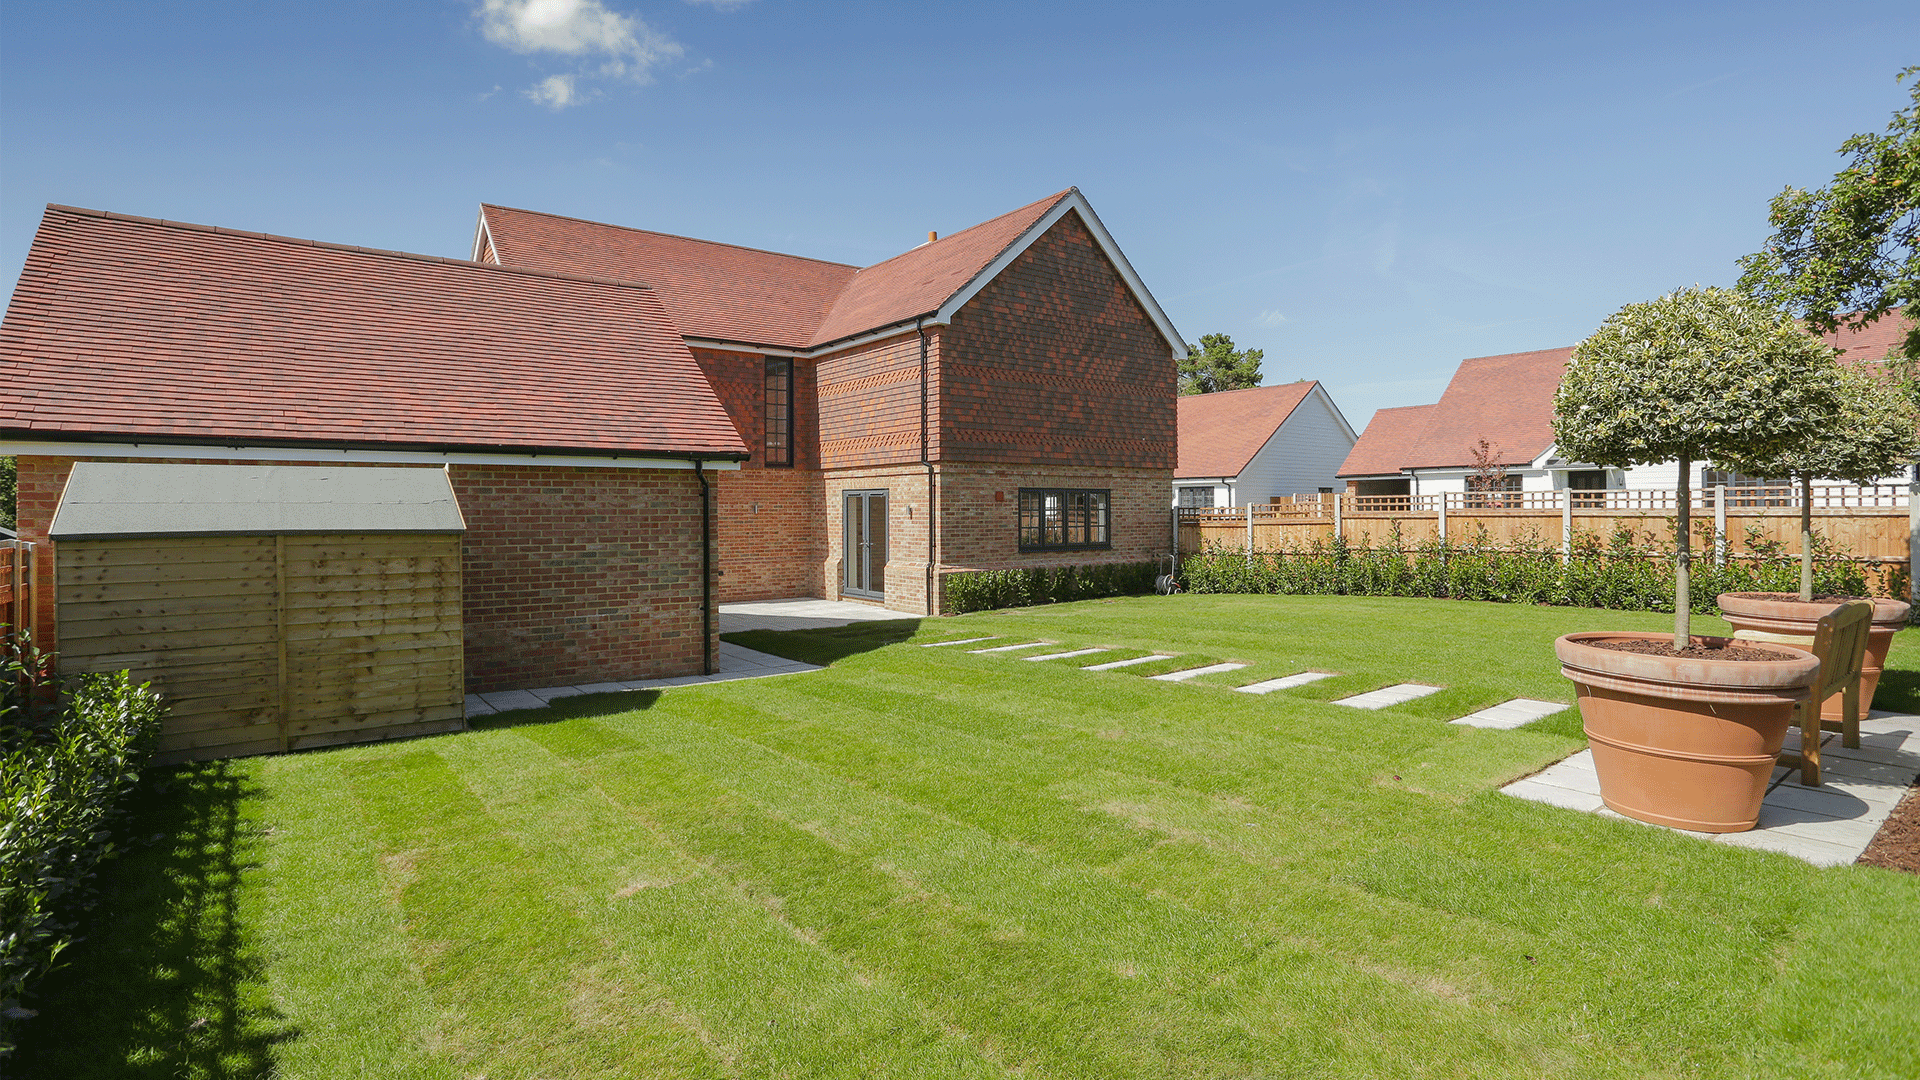 Miller's Meadow - Plot 8 Garden with a stone pathway and facing the back of the large detached house